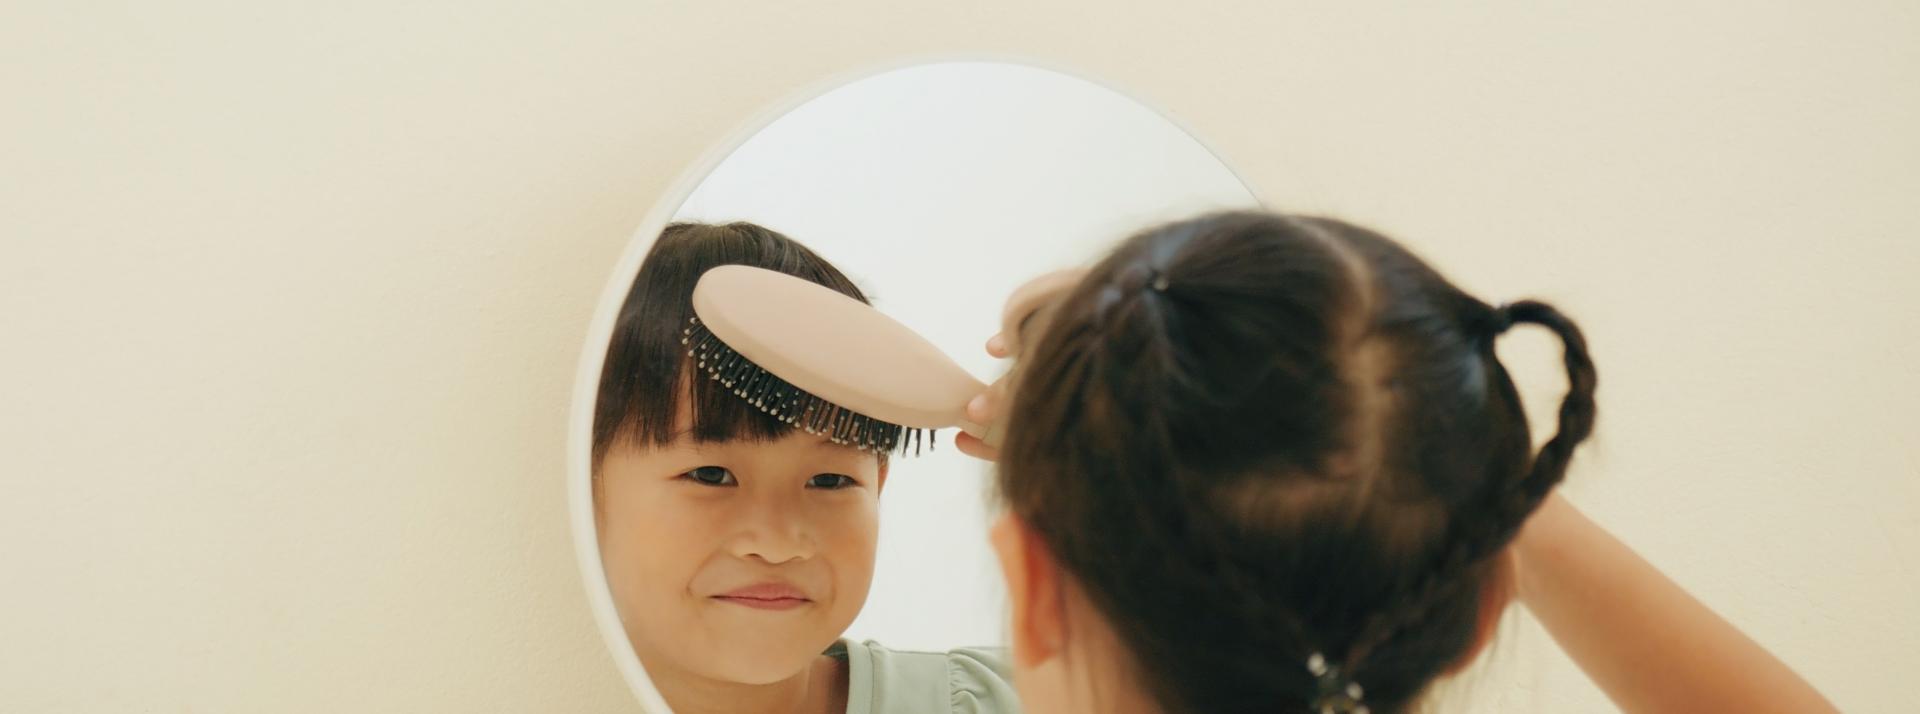 A child brushing their hair in the mirror.